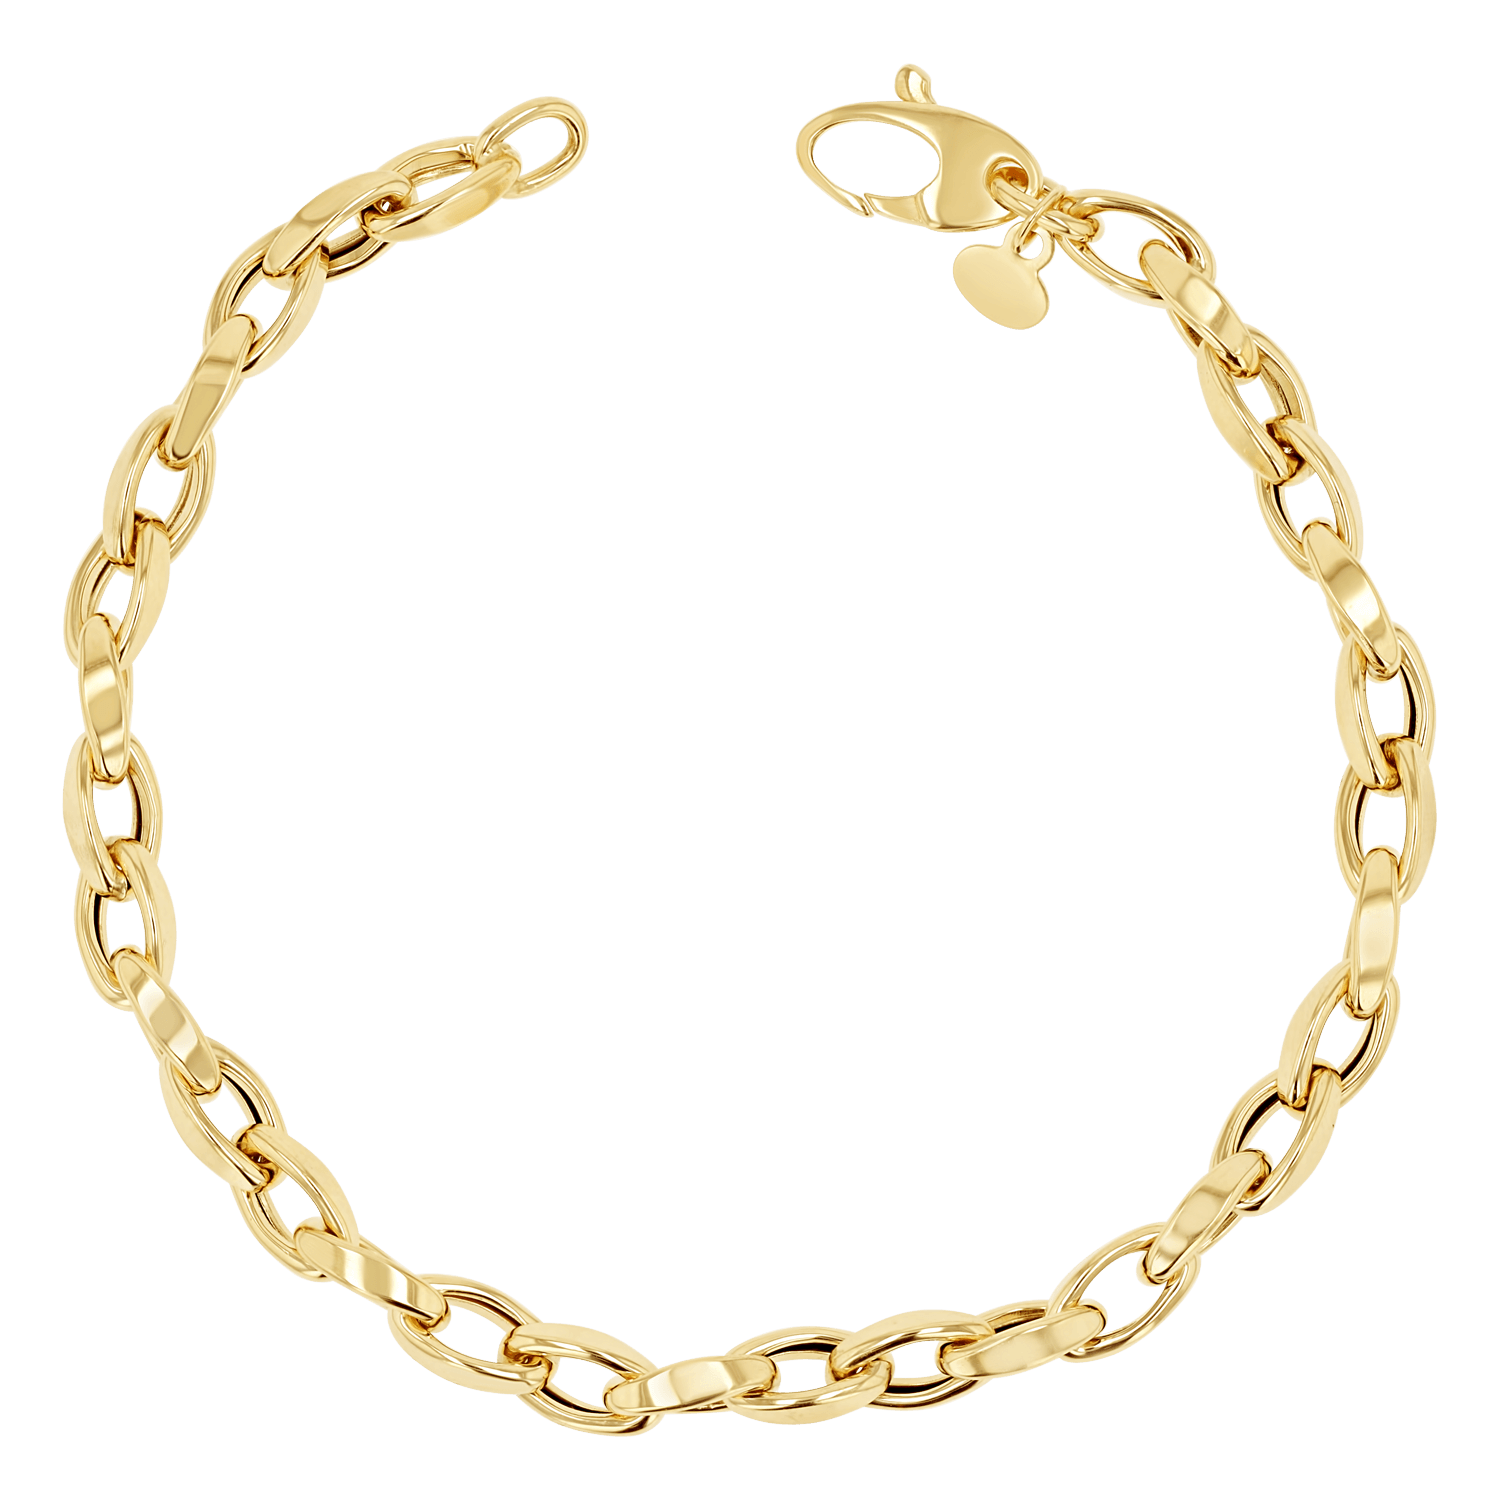 14K Large Paper Clip Chain Bracelet 14K Yellow Gold / 7 Inches by Baby Gold - Shop Custom Gold Jewelry